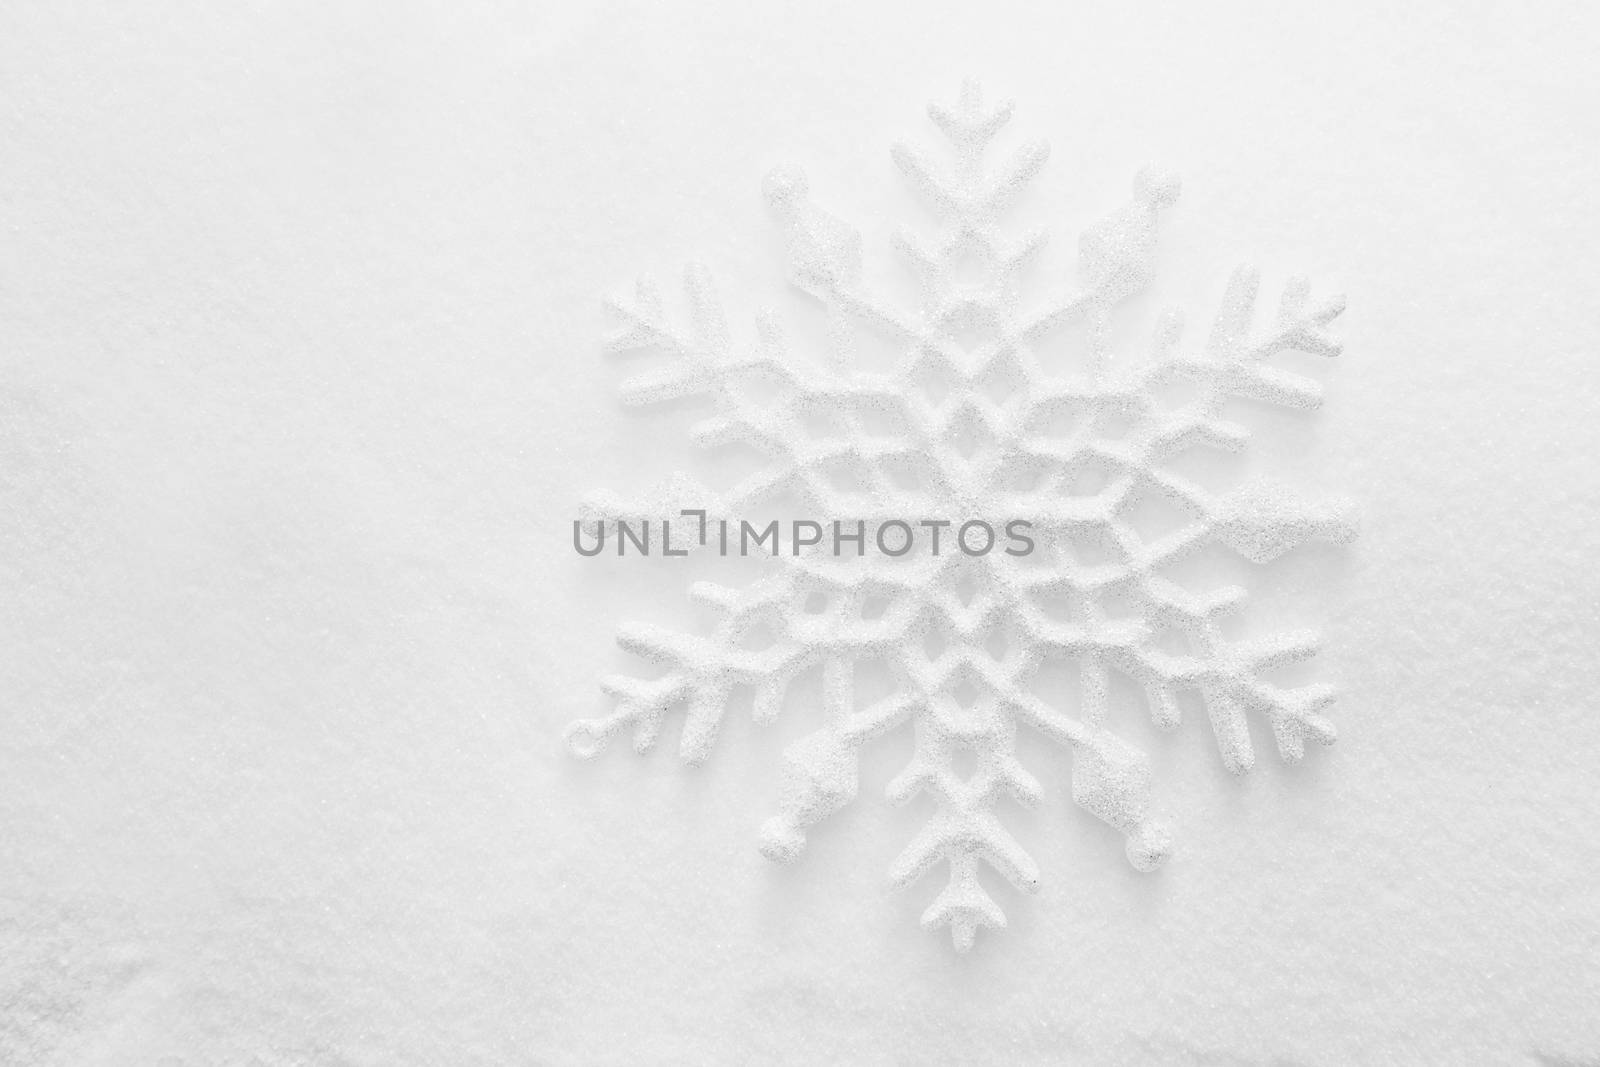 Winter, Christmas background. Snowflake on snow by photocreo